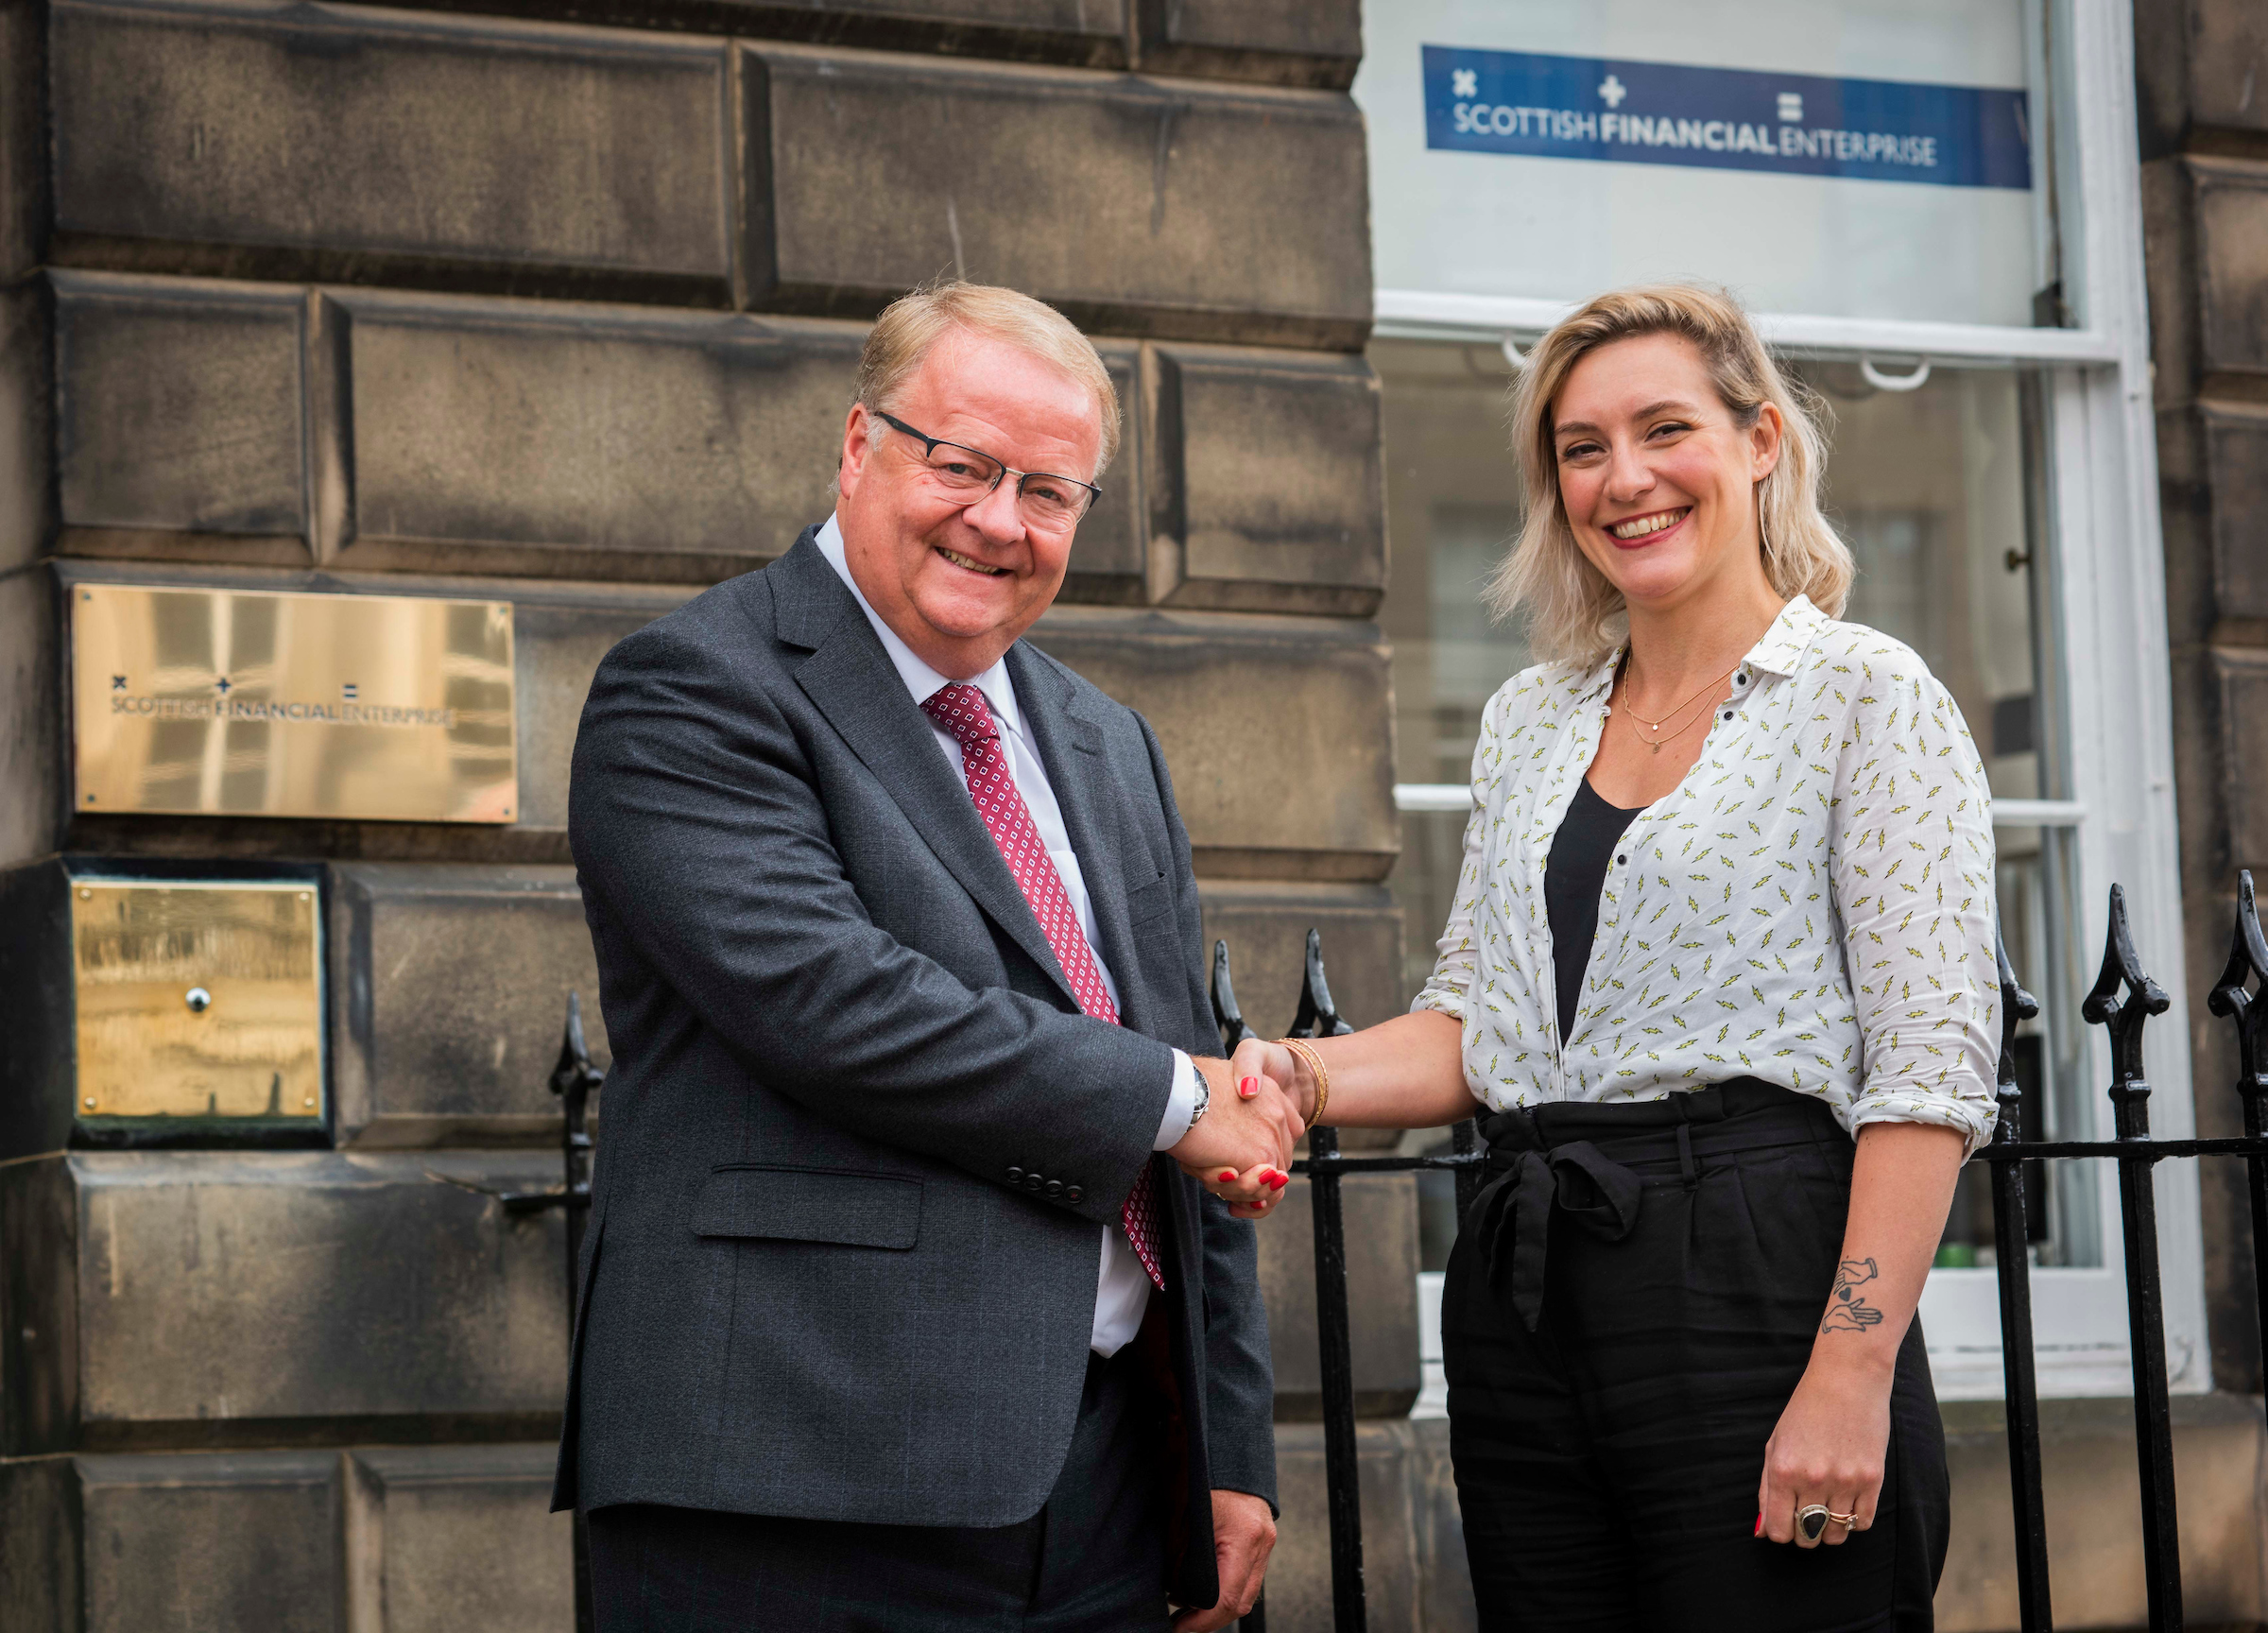 Canongate Youth is selected as the Scottish Financial Enterprise's charity partner